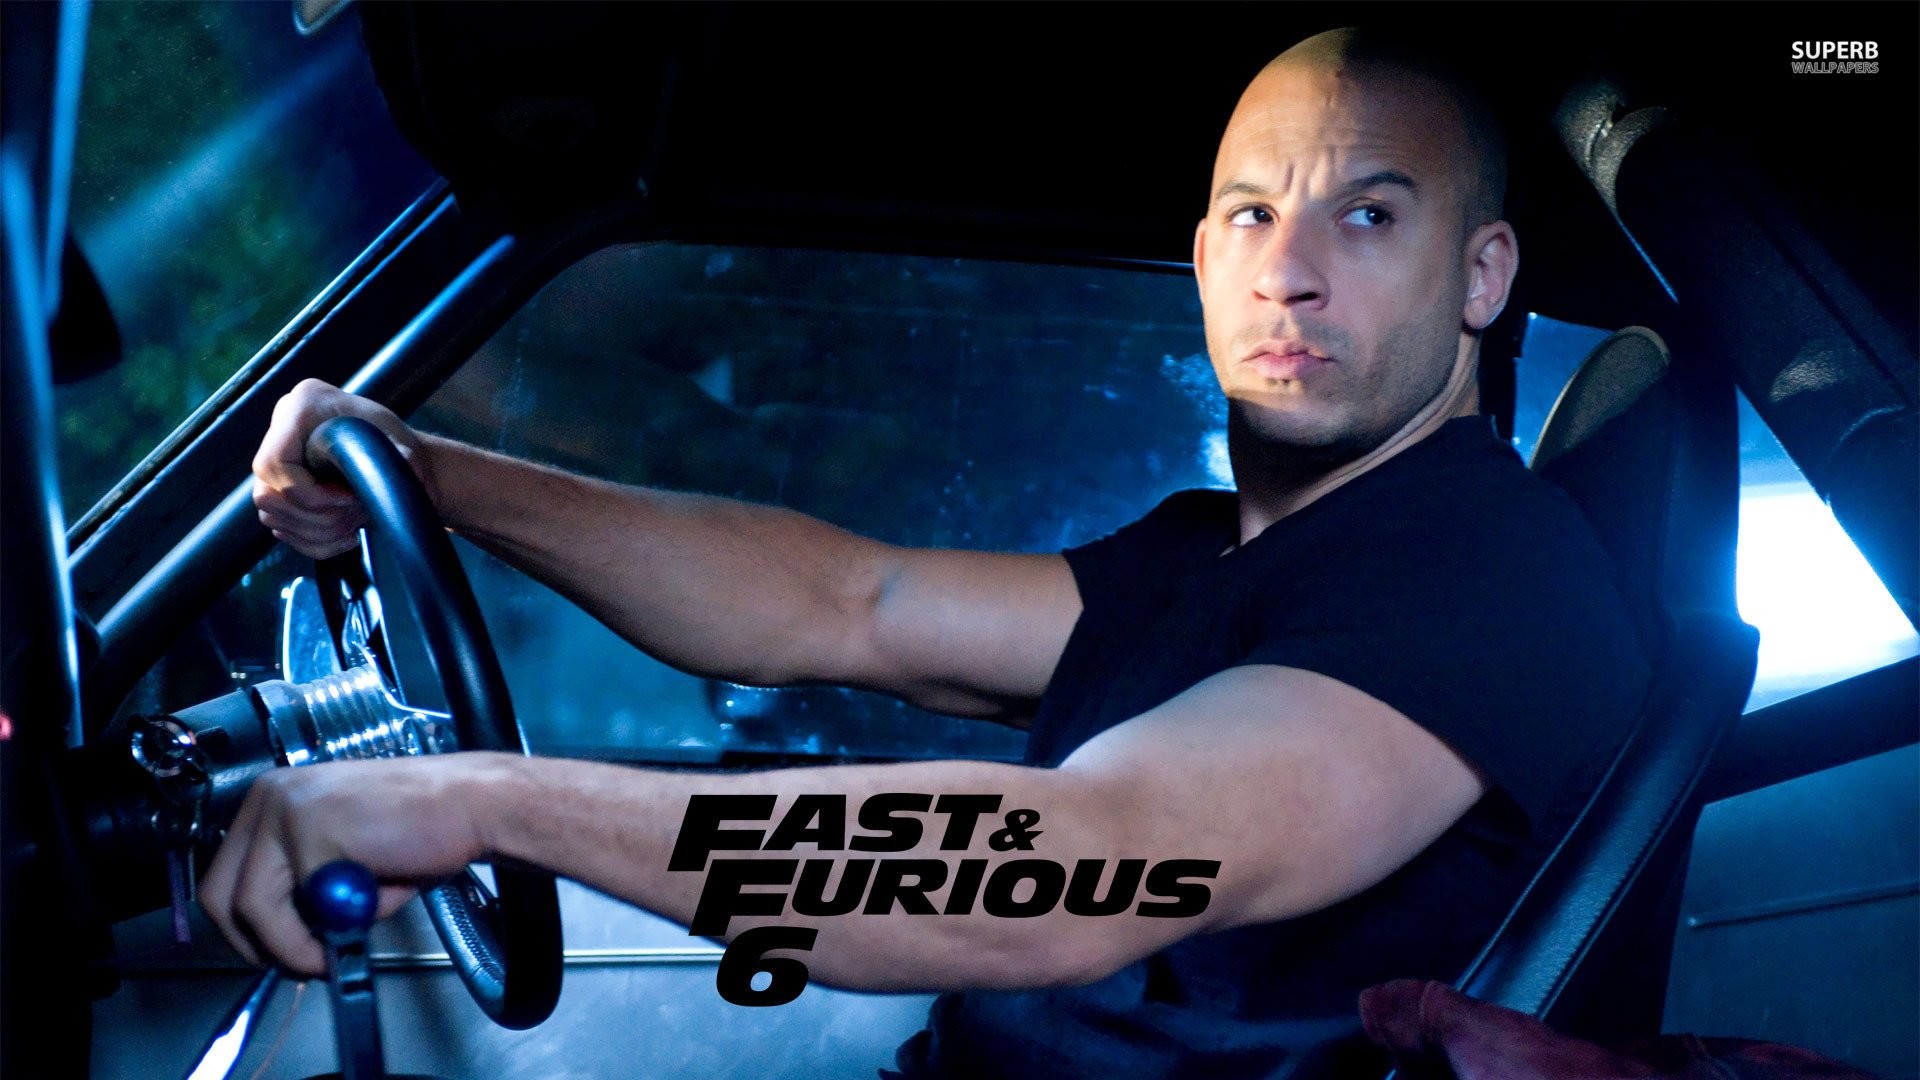 1920x1080 Dominic Toretto - Fast Amp Furious 6 547918. UPLOAD. TAGS: Vin Diesel